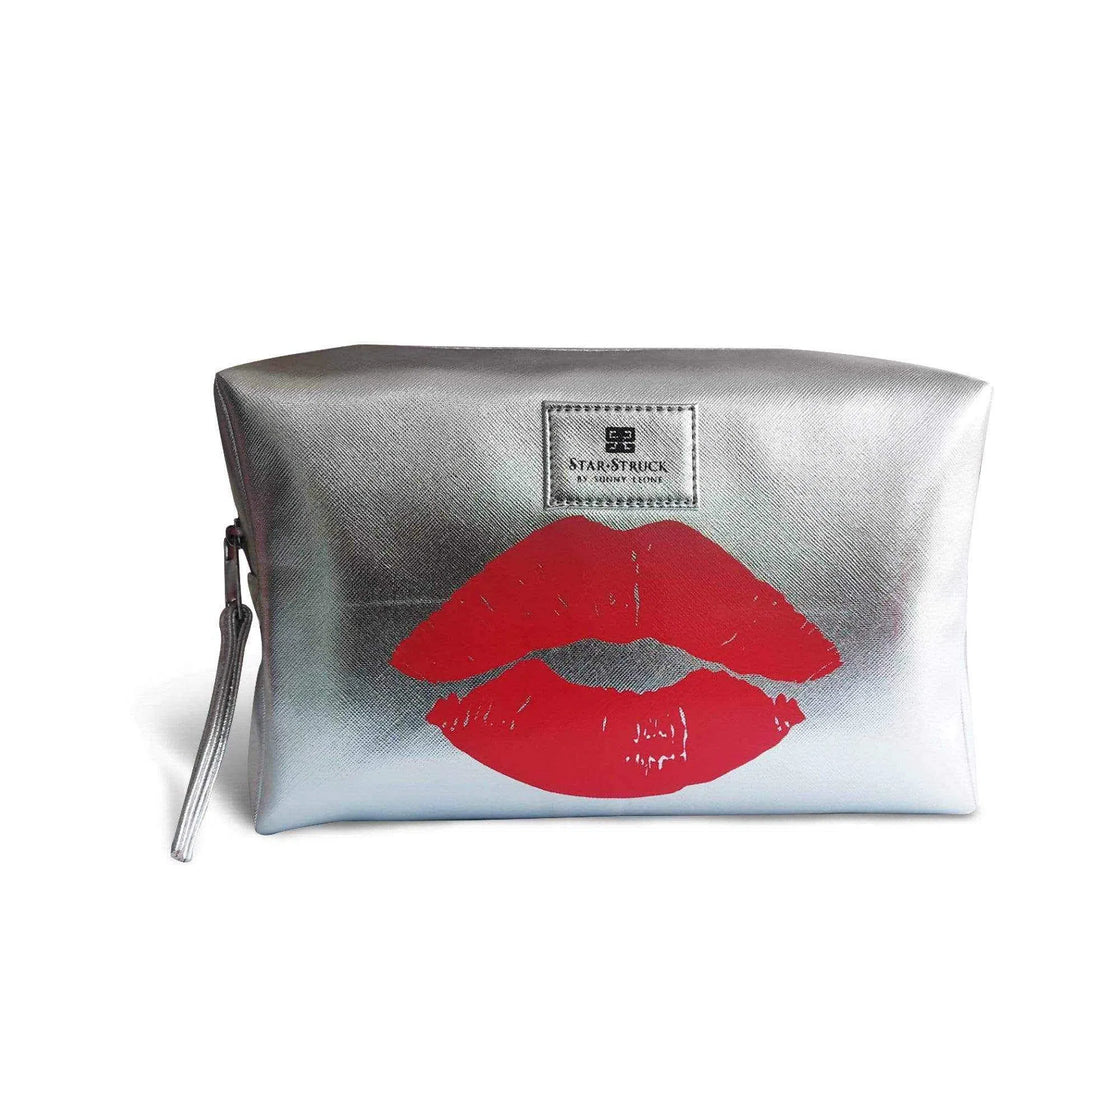 Starstruck Makeup Pouch - Silver-Makeup Pouch-cruelty free cosmetics-Sunny Leone